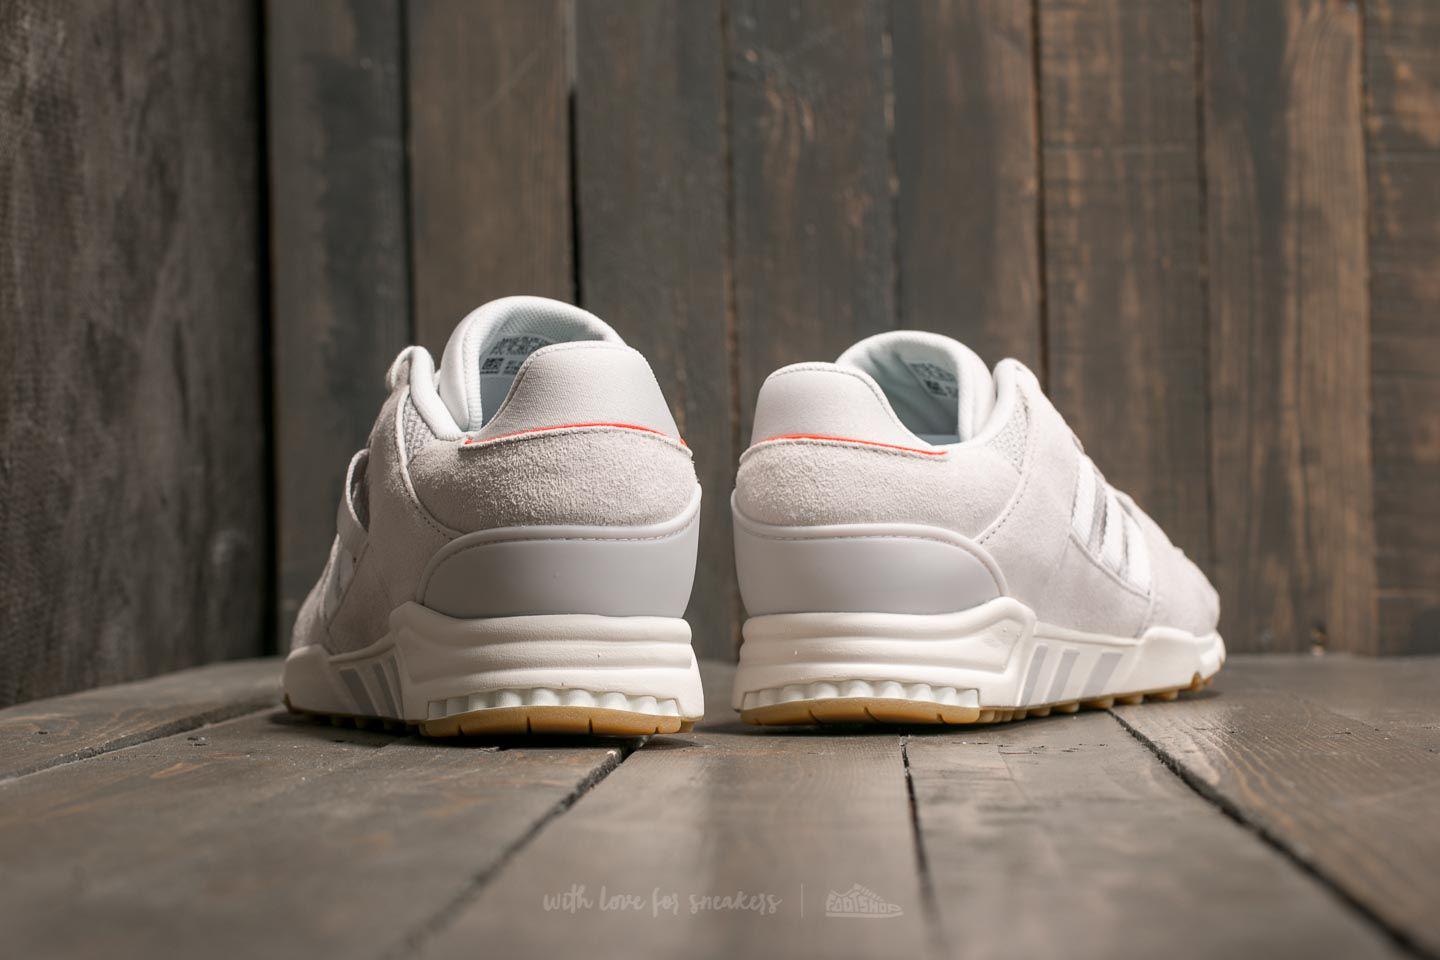 adidas eqt one to one